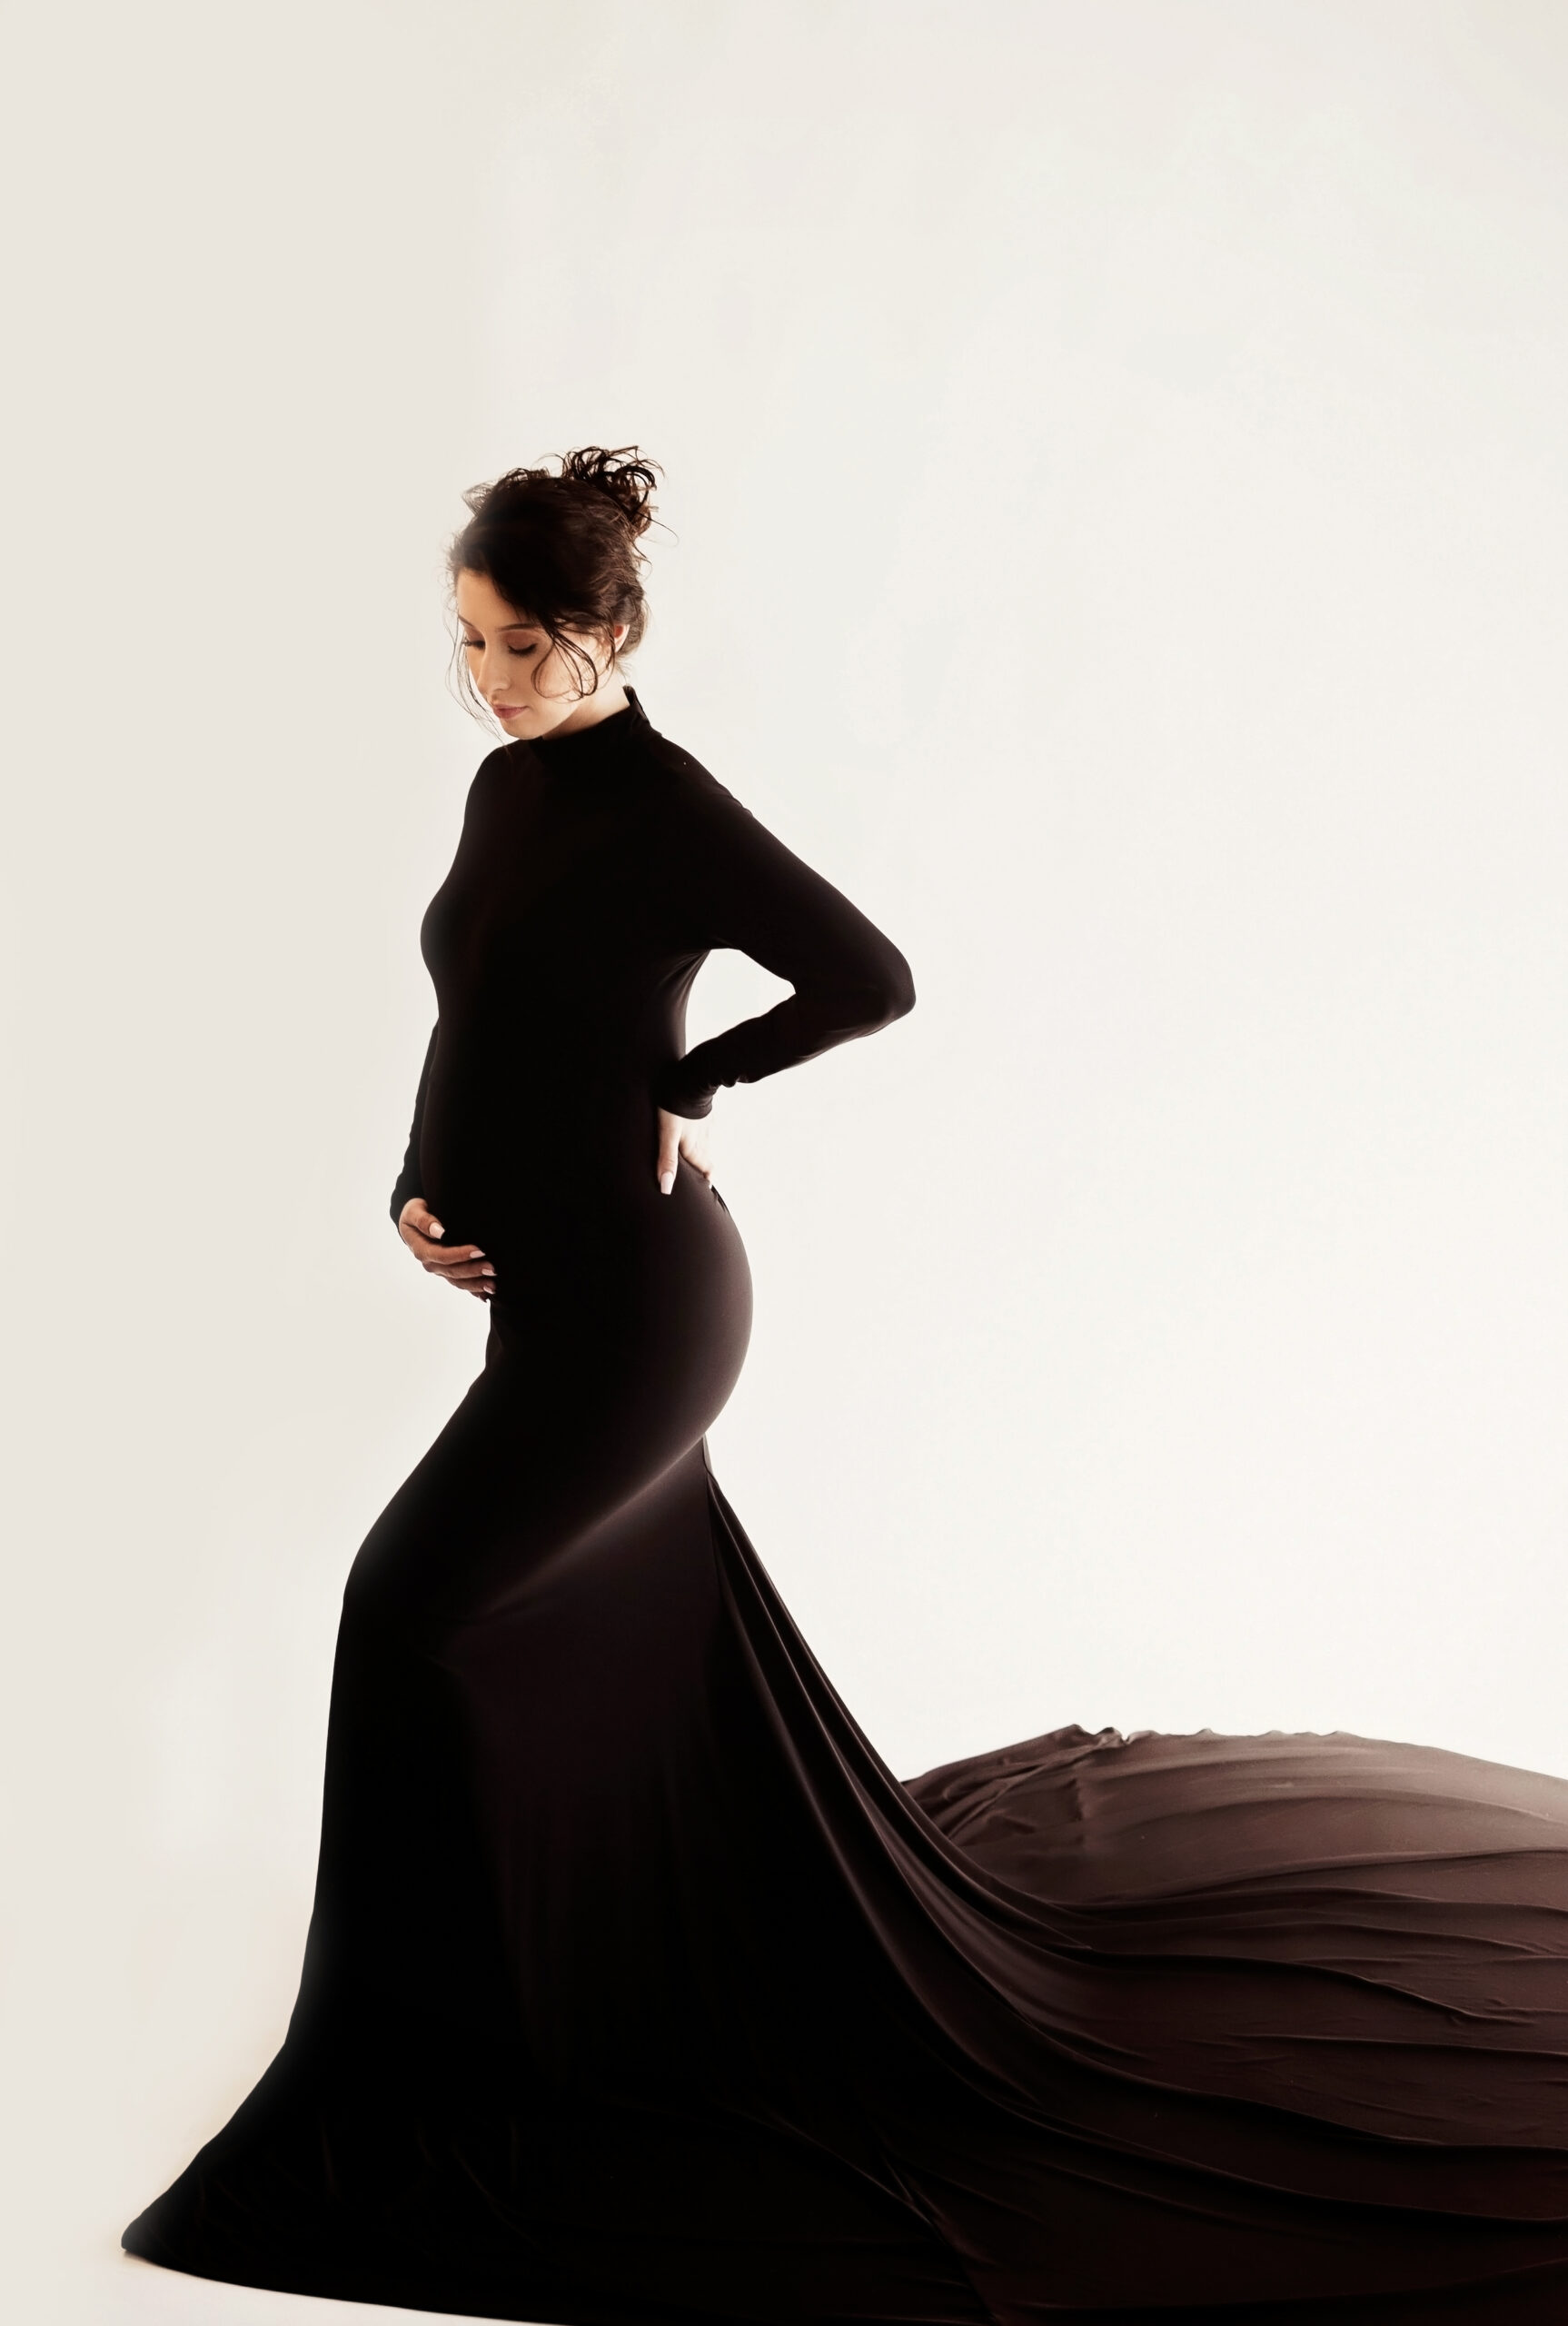 Wichita Falls, Texas maternity photographer, Wichita Falls, Texas newborn photographer, white woman in black gown standing on white backdrop with hand on pregnant belly